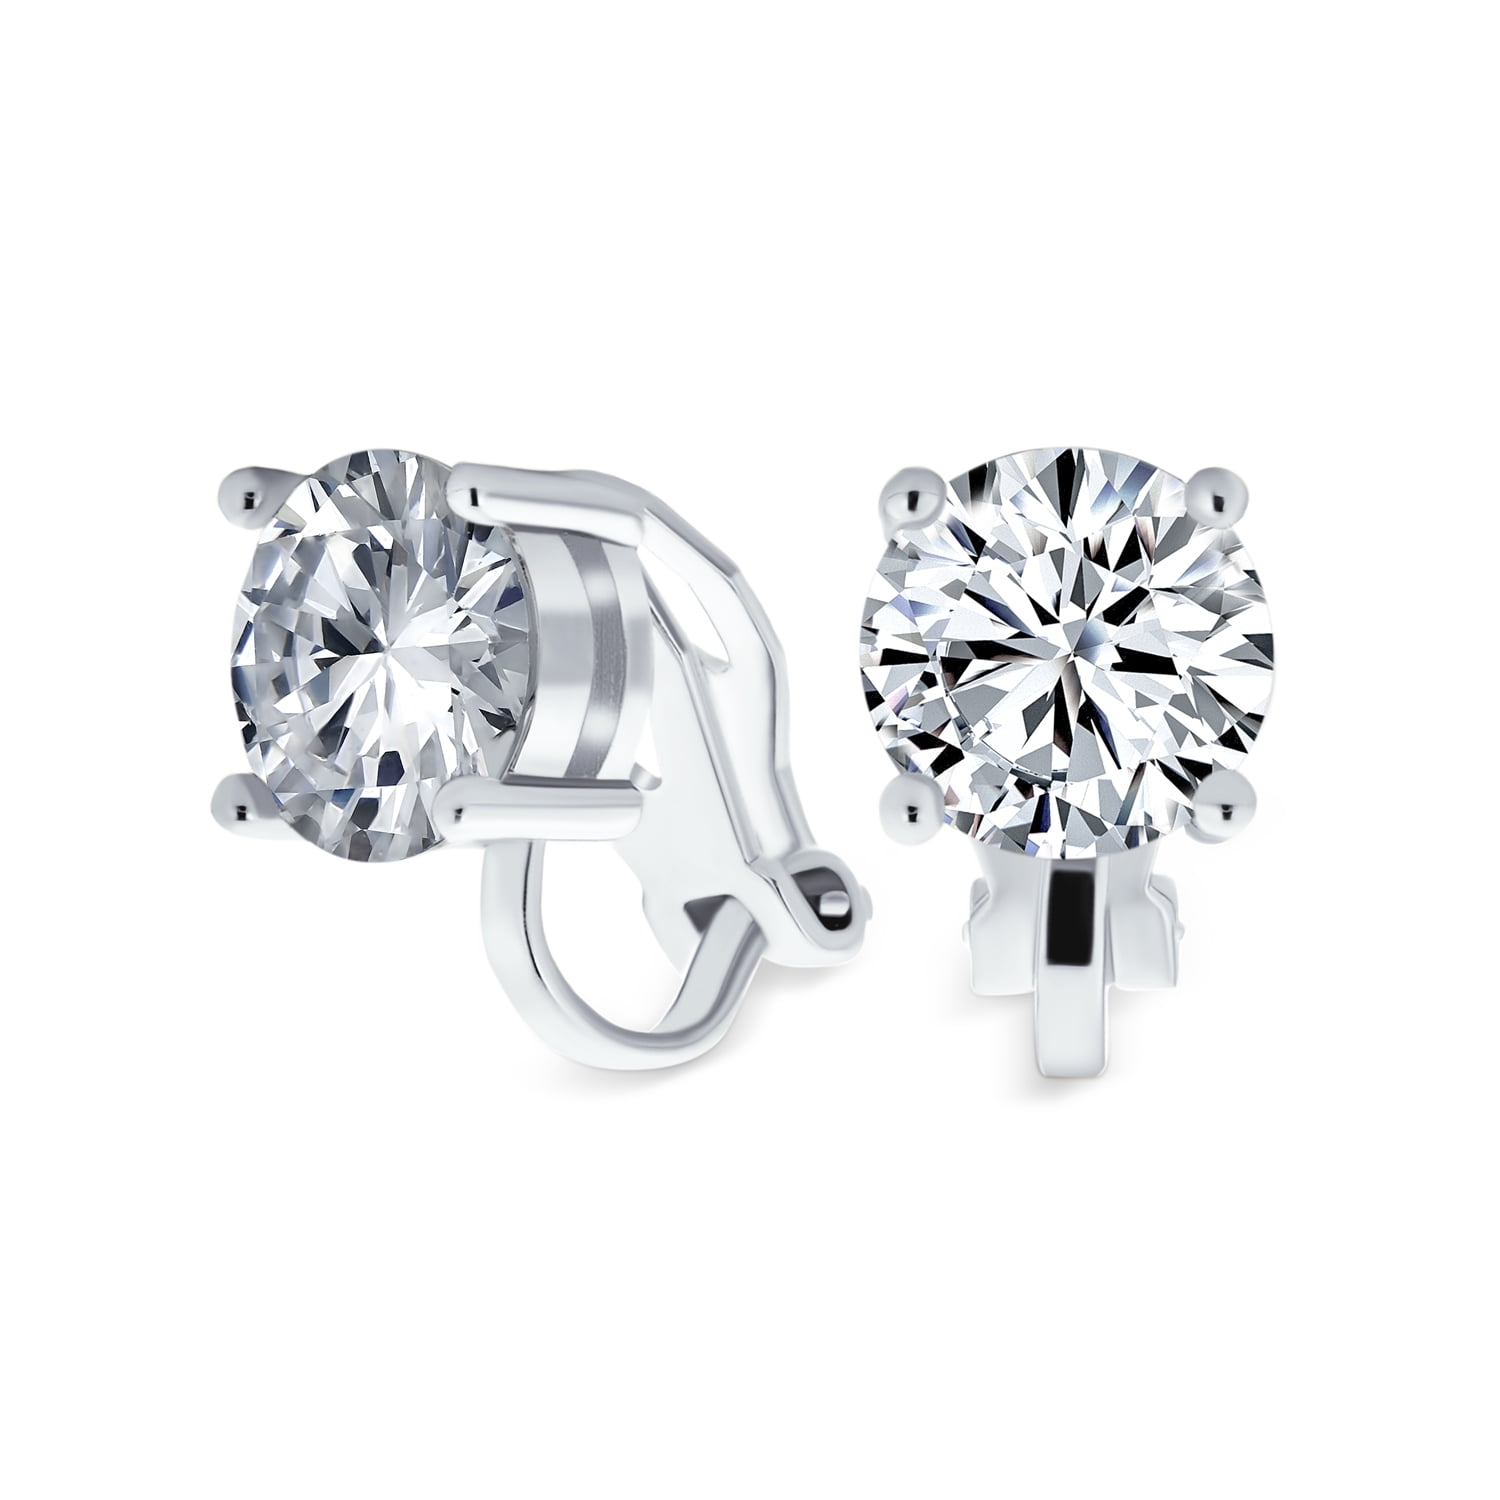 8mm Black Round Cut Cz Clip On Earrings In Rhodium Plating